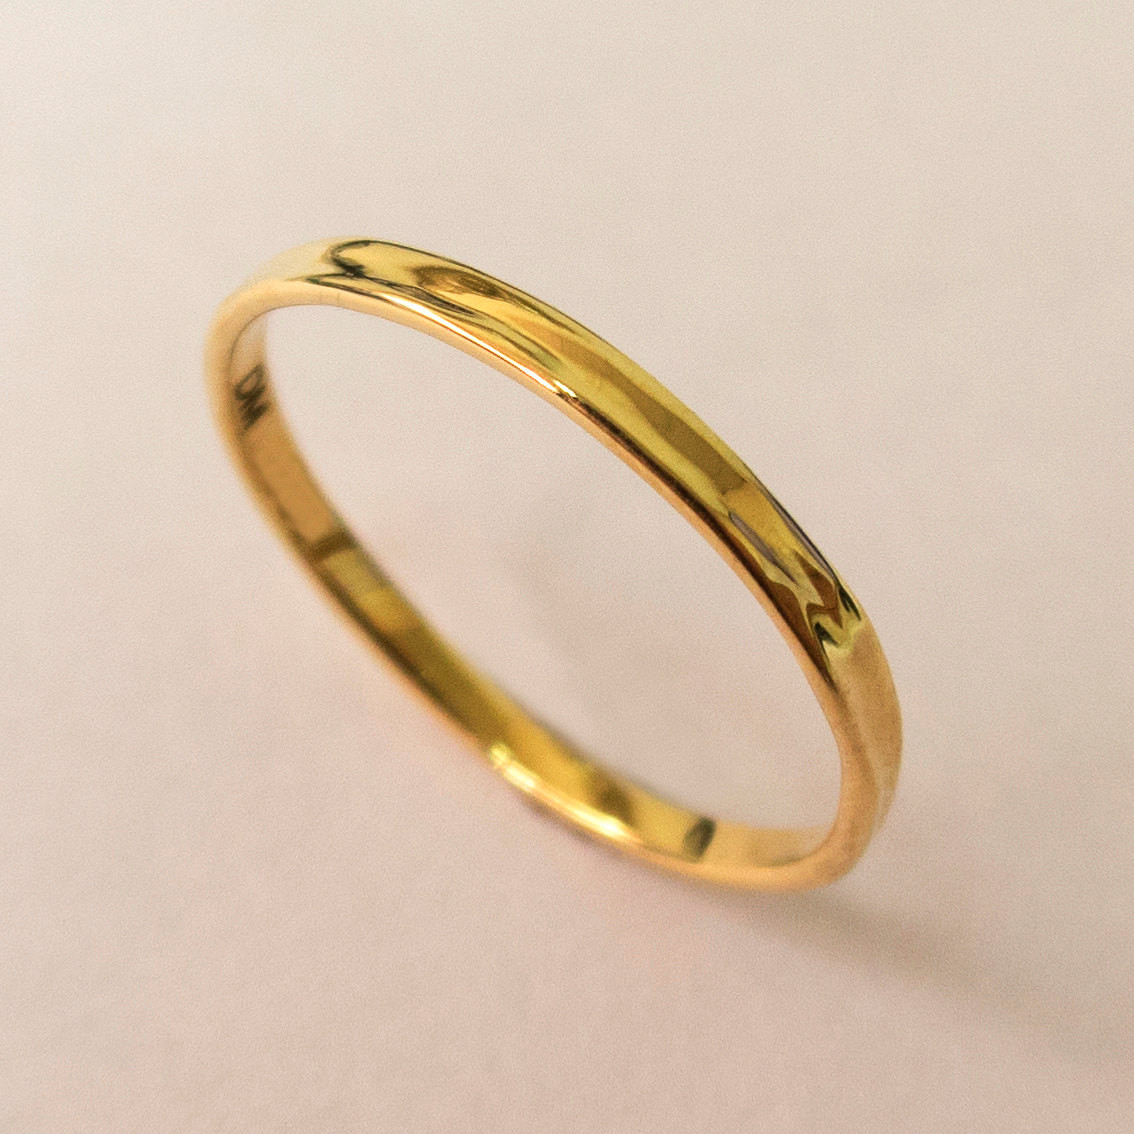 Wedding Bands Yellow Gold
 Simple Gold Wedding Band 14k Yellow Gold Ring Yellow Gold